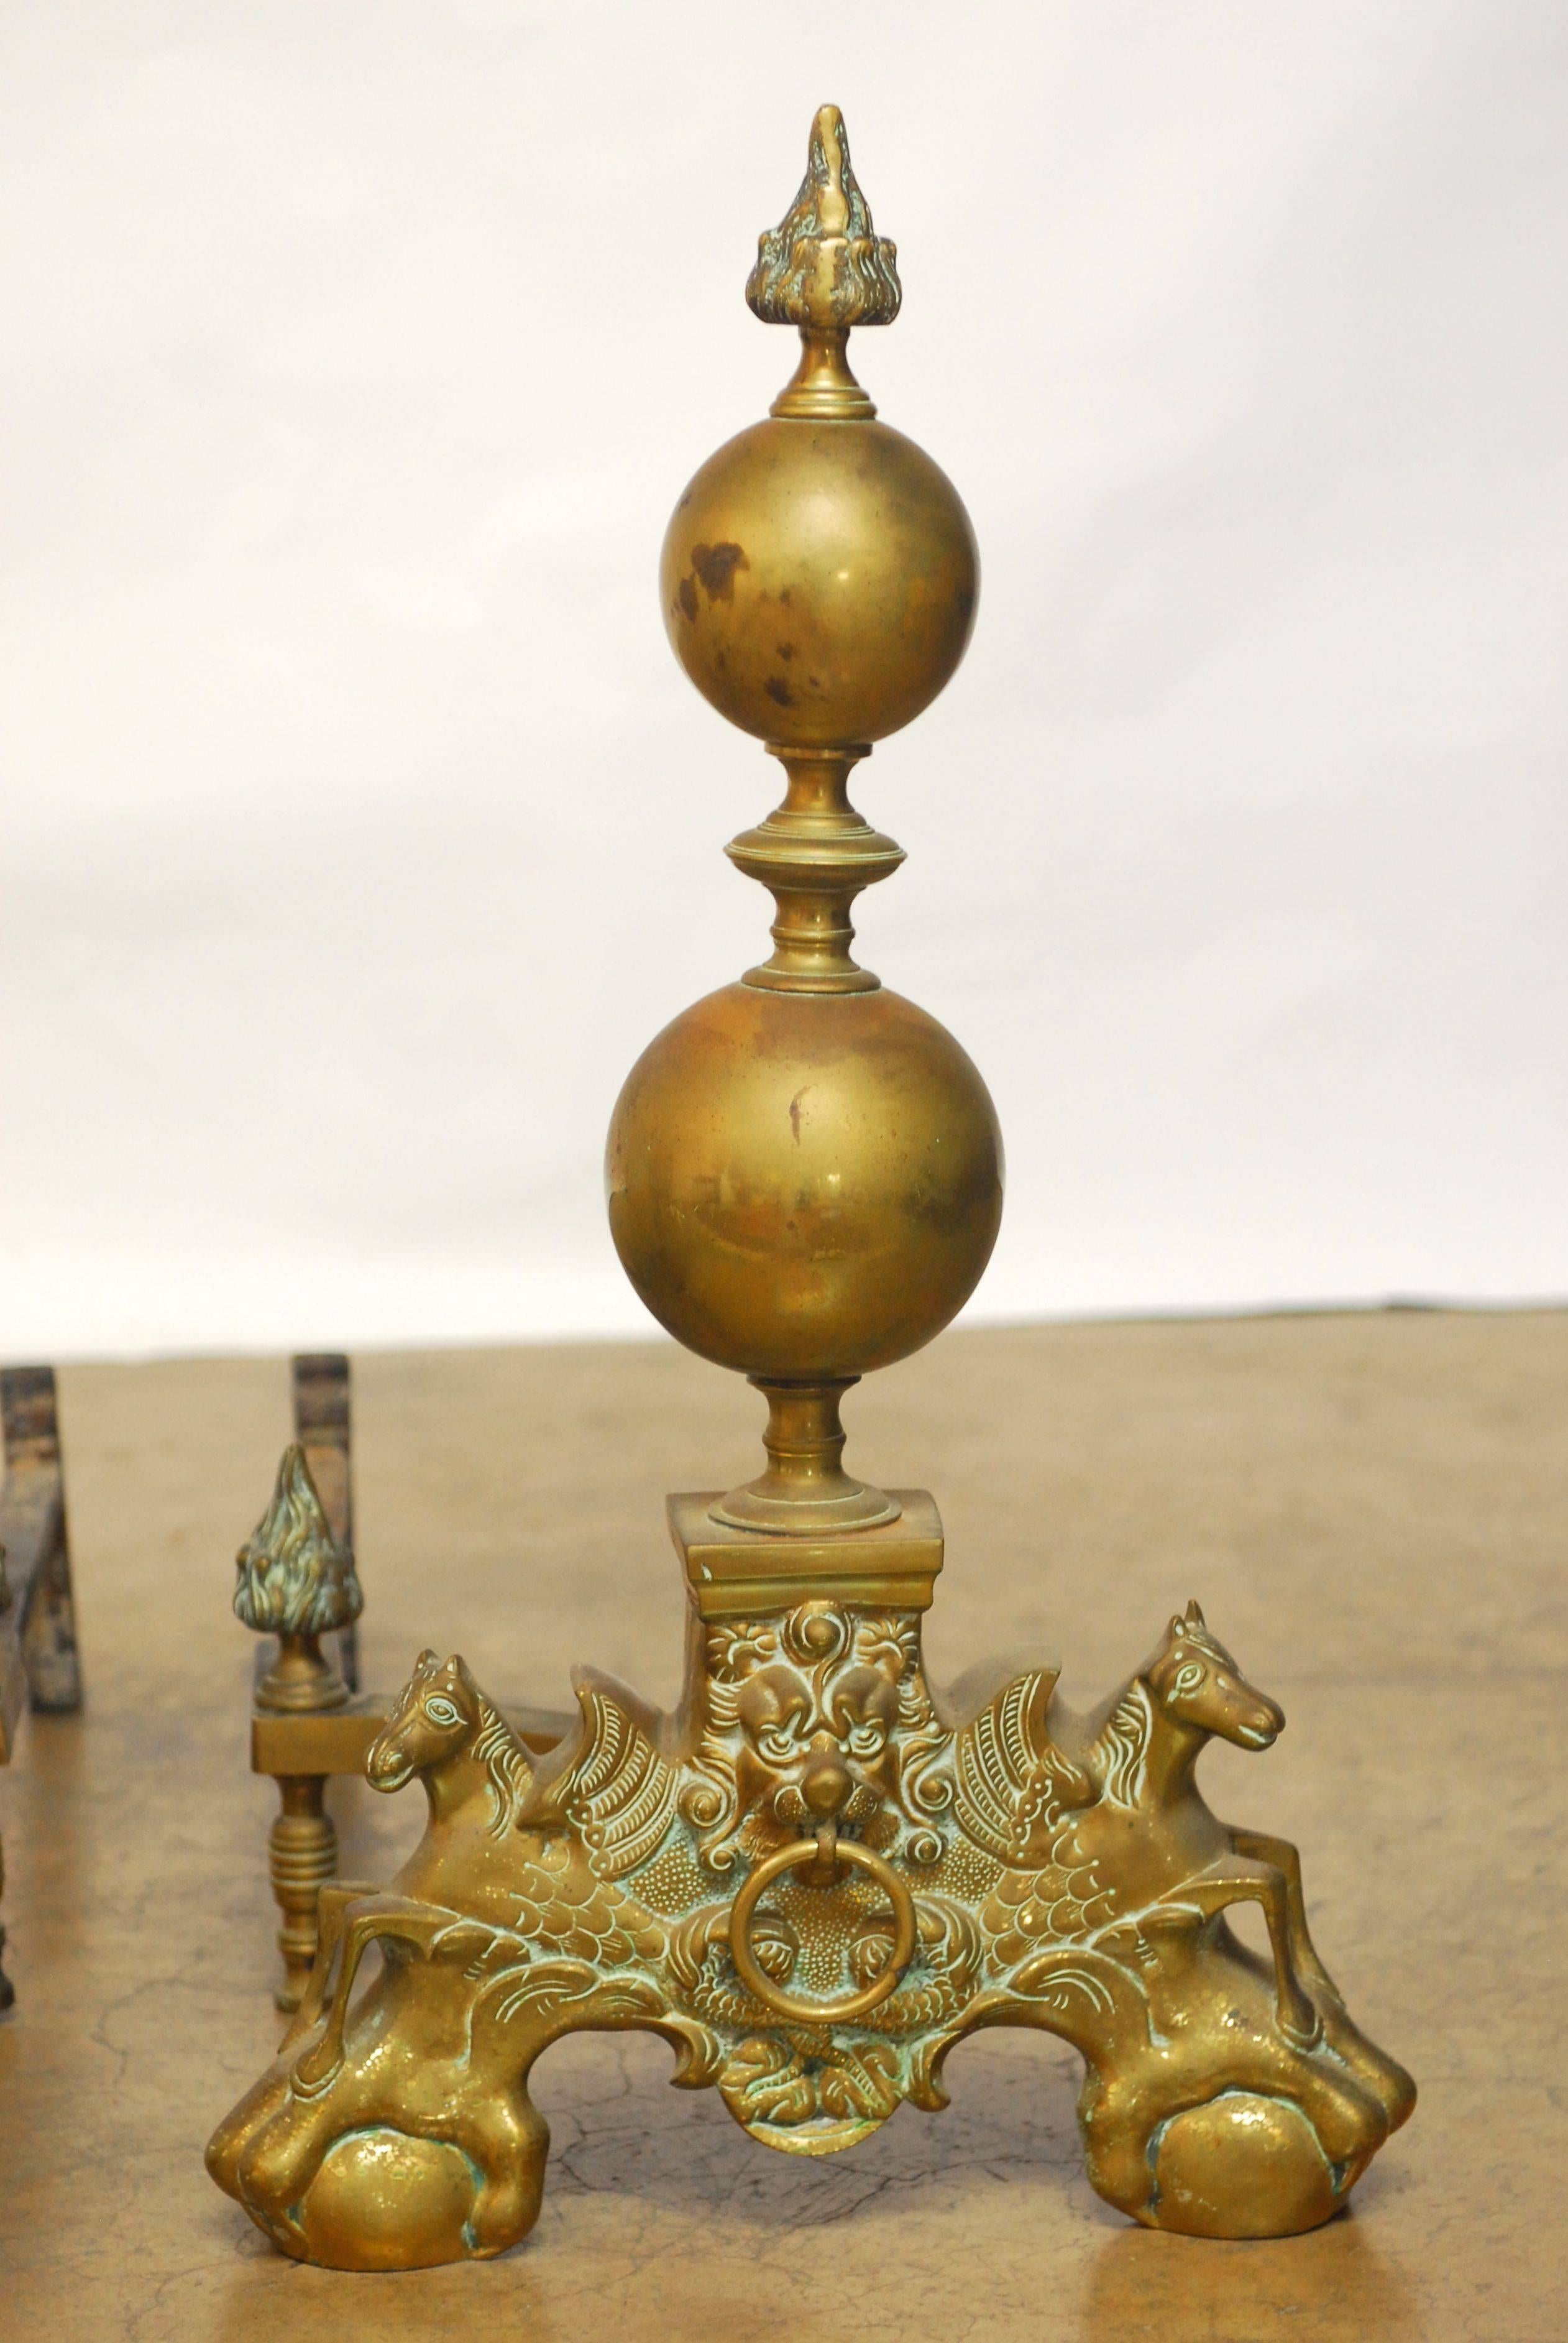 Exceptional pair of English andirons constructed of brass featuring large double cannonballs with flame finials. Each andiron flanked by winged seahorses and centered by a lion's head with a ring motif. Supported by stylized ball and claw feat and